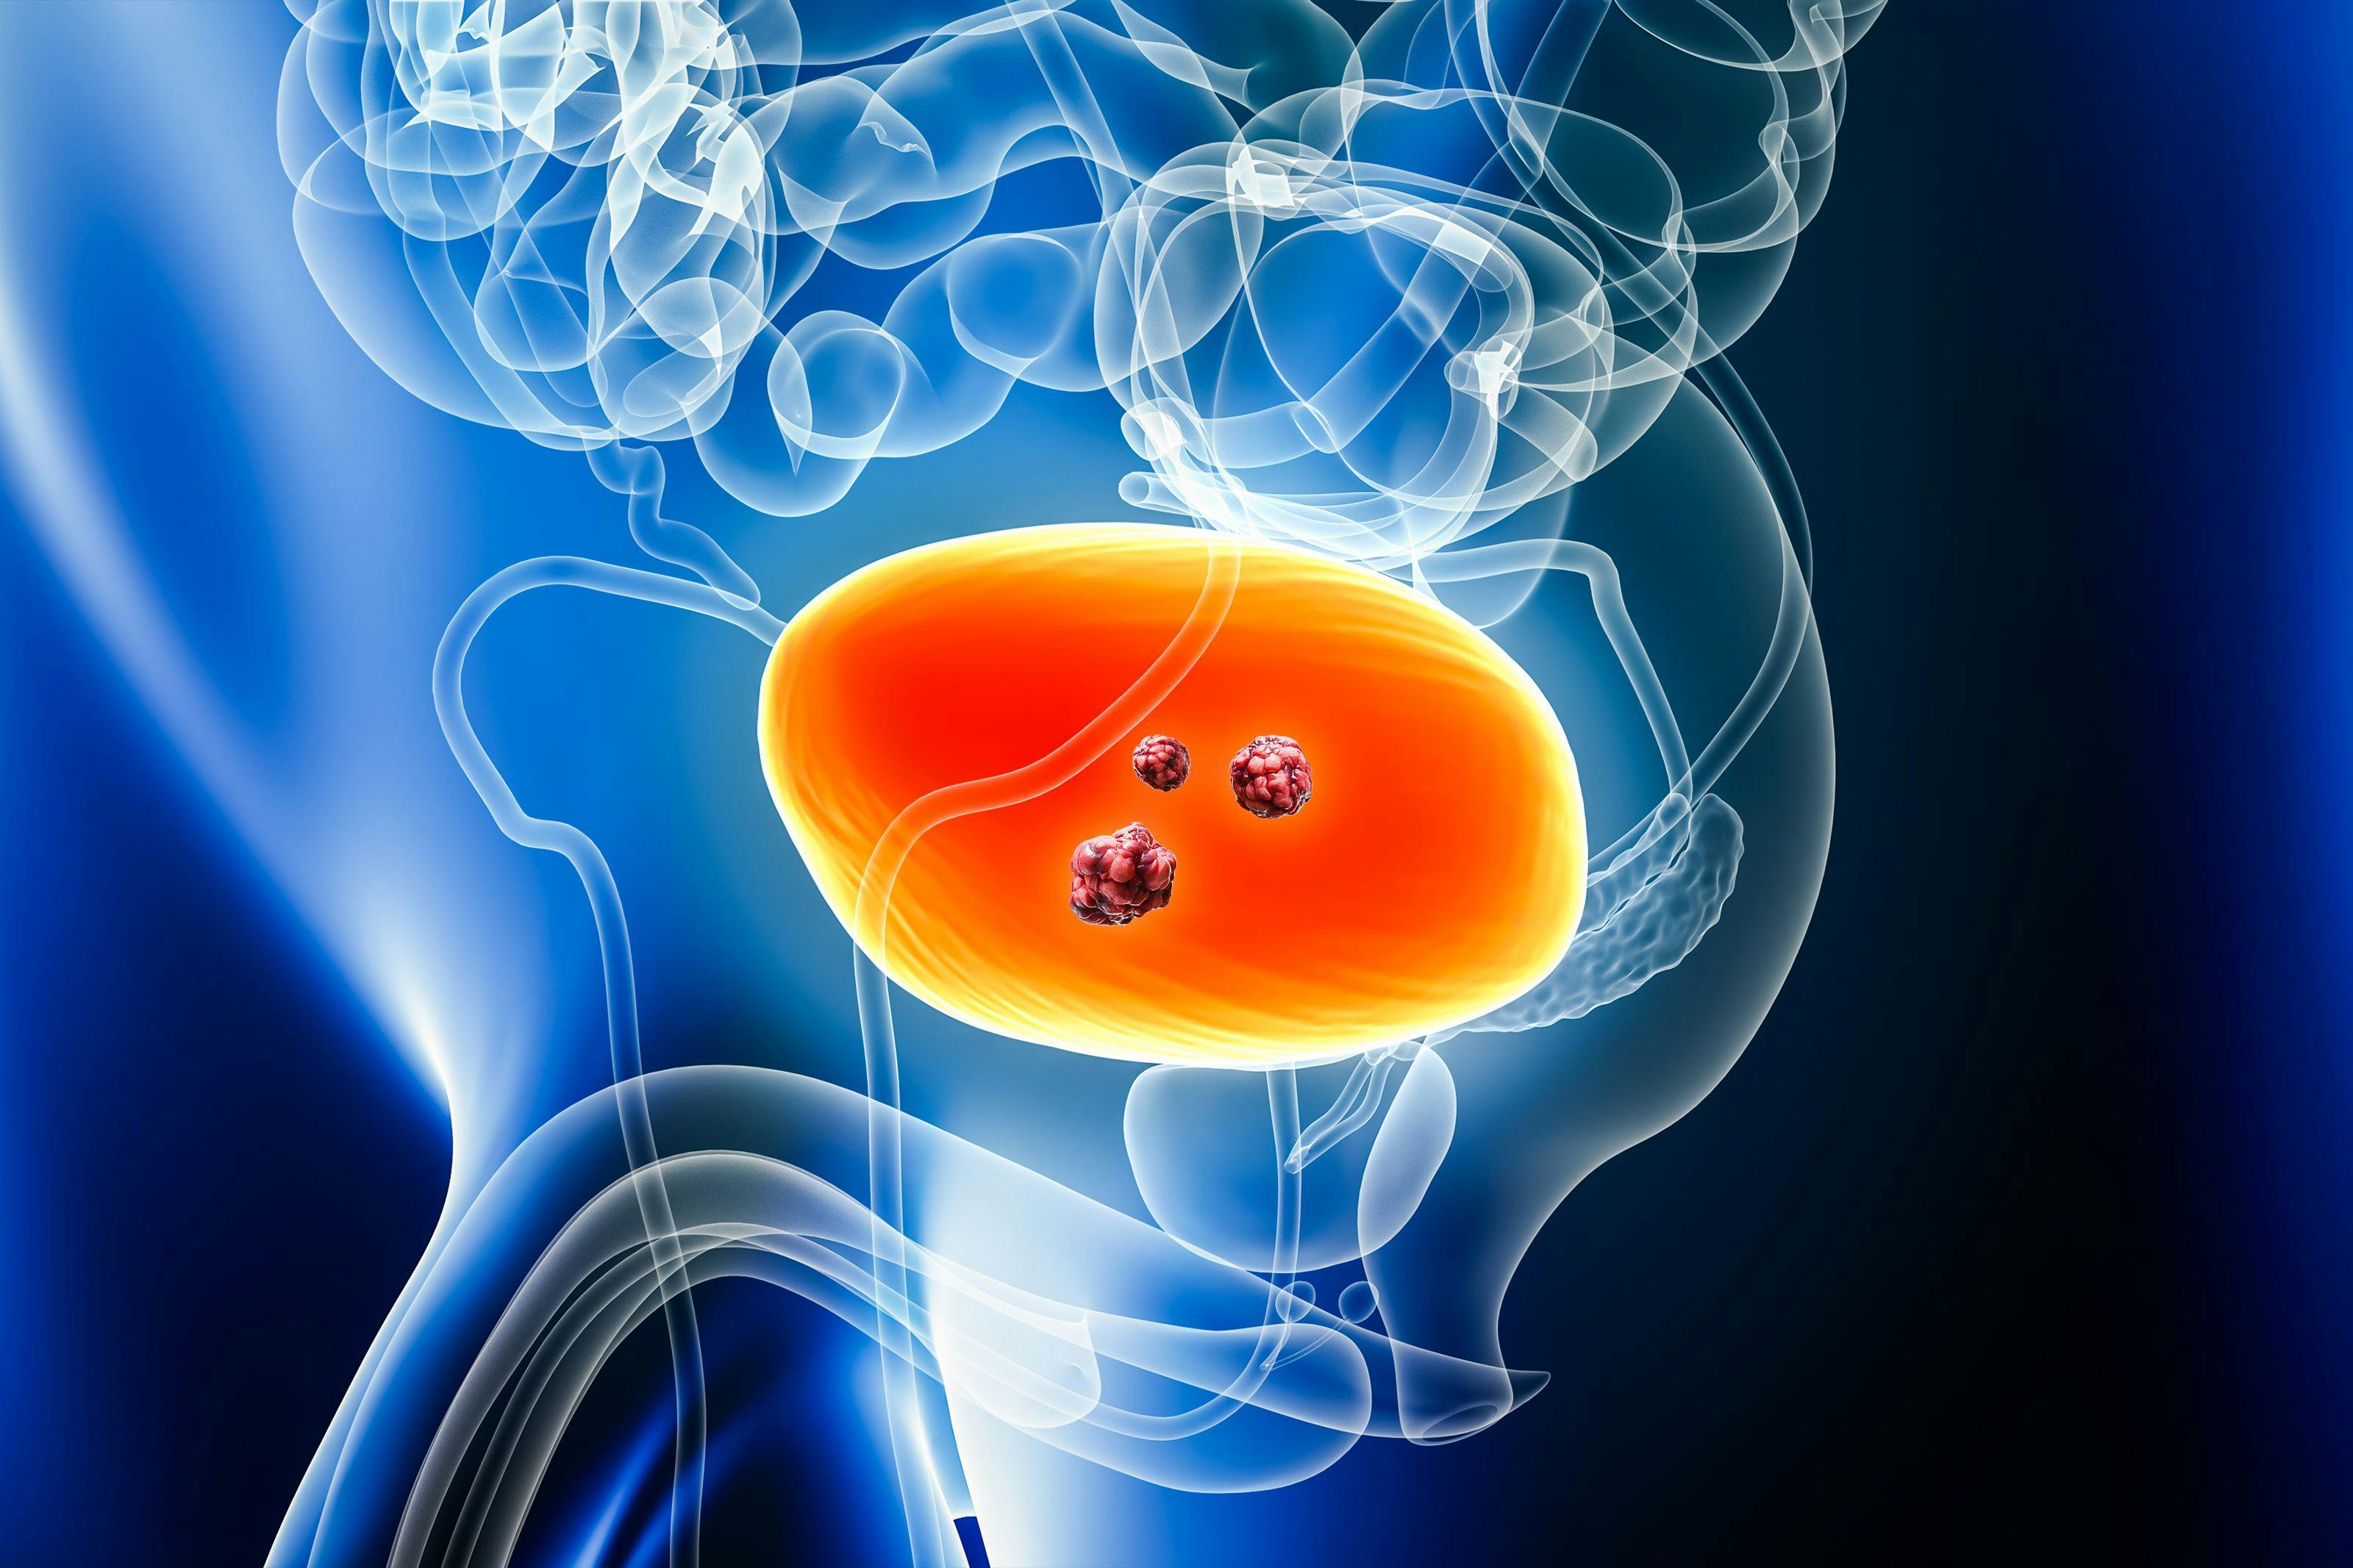 Image credit: Matthieu | stock.adobe.com. Urinary bladder cancer with organs and tumors or cancerous cells 3D rendering illustration with male body. Anatomy, oncology, biomedical, disease, medical, biology, science, healthcare